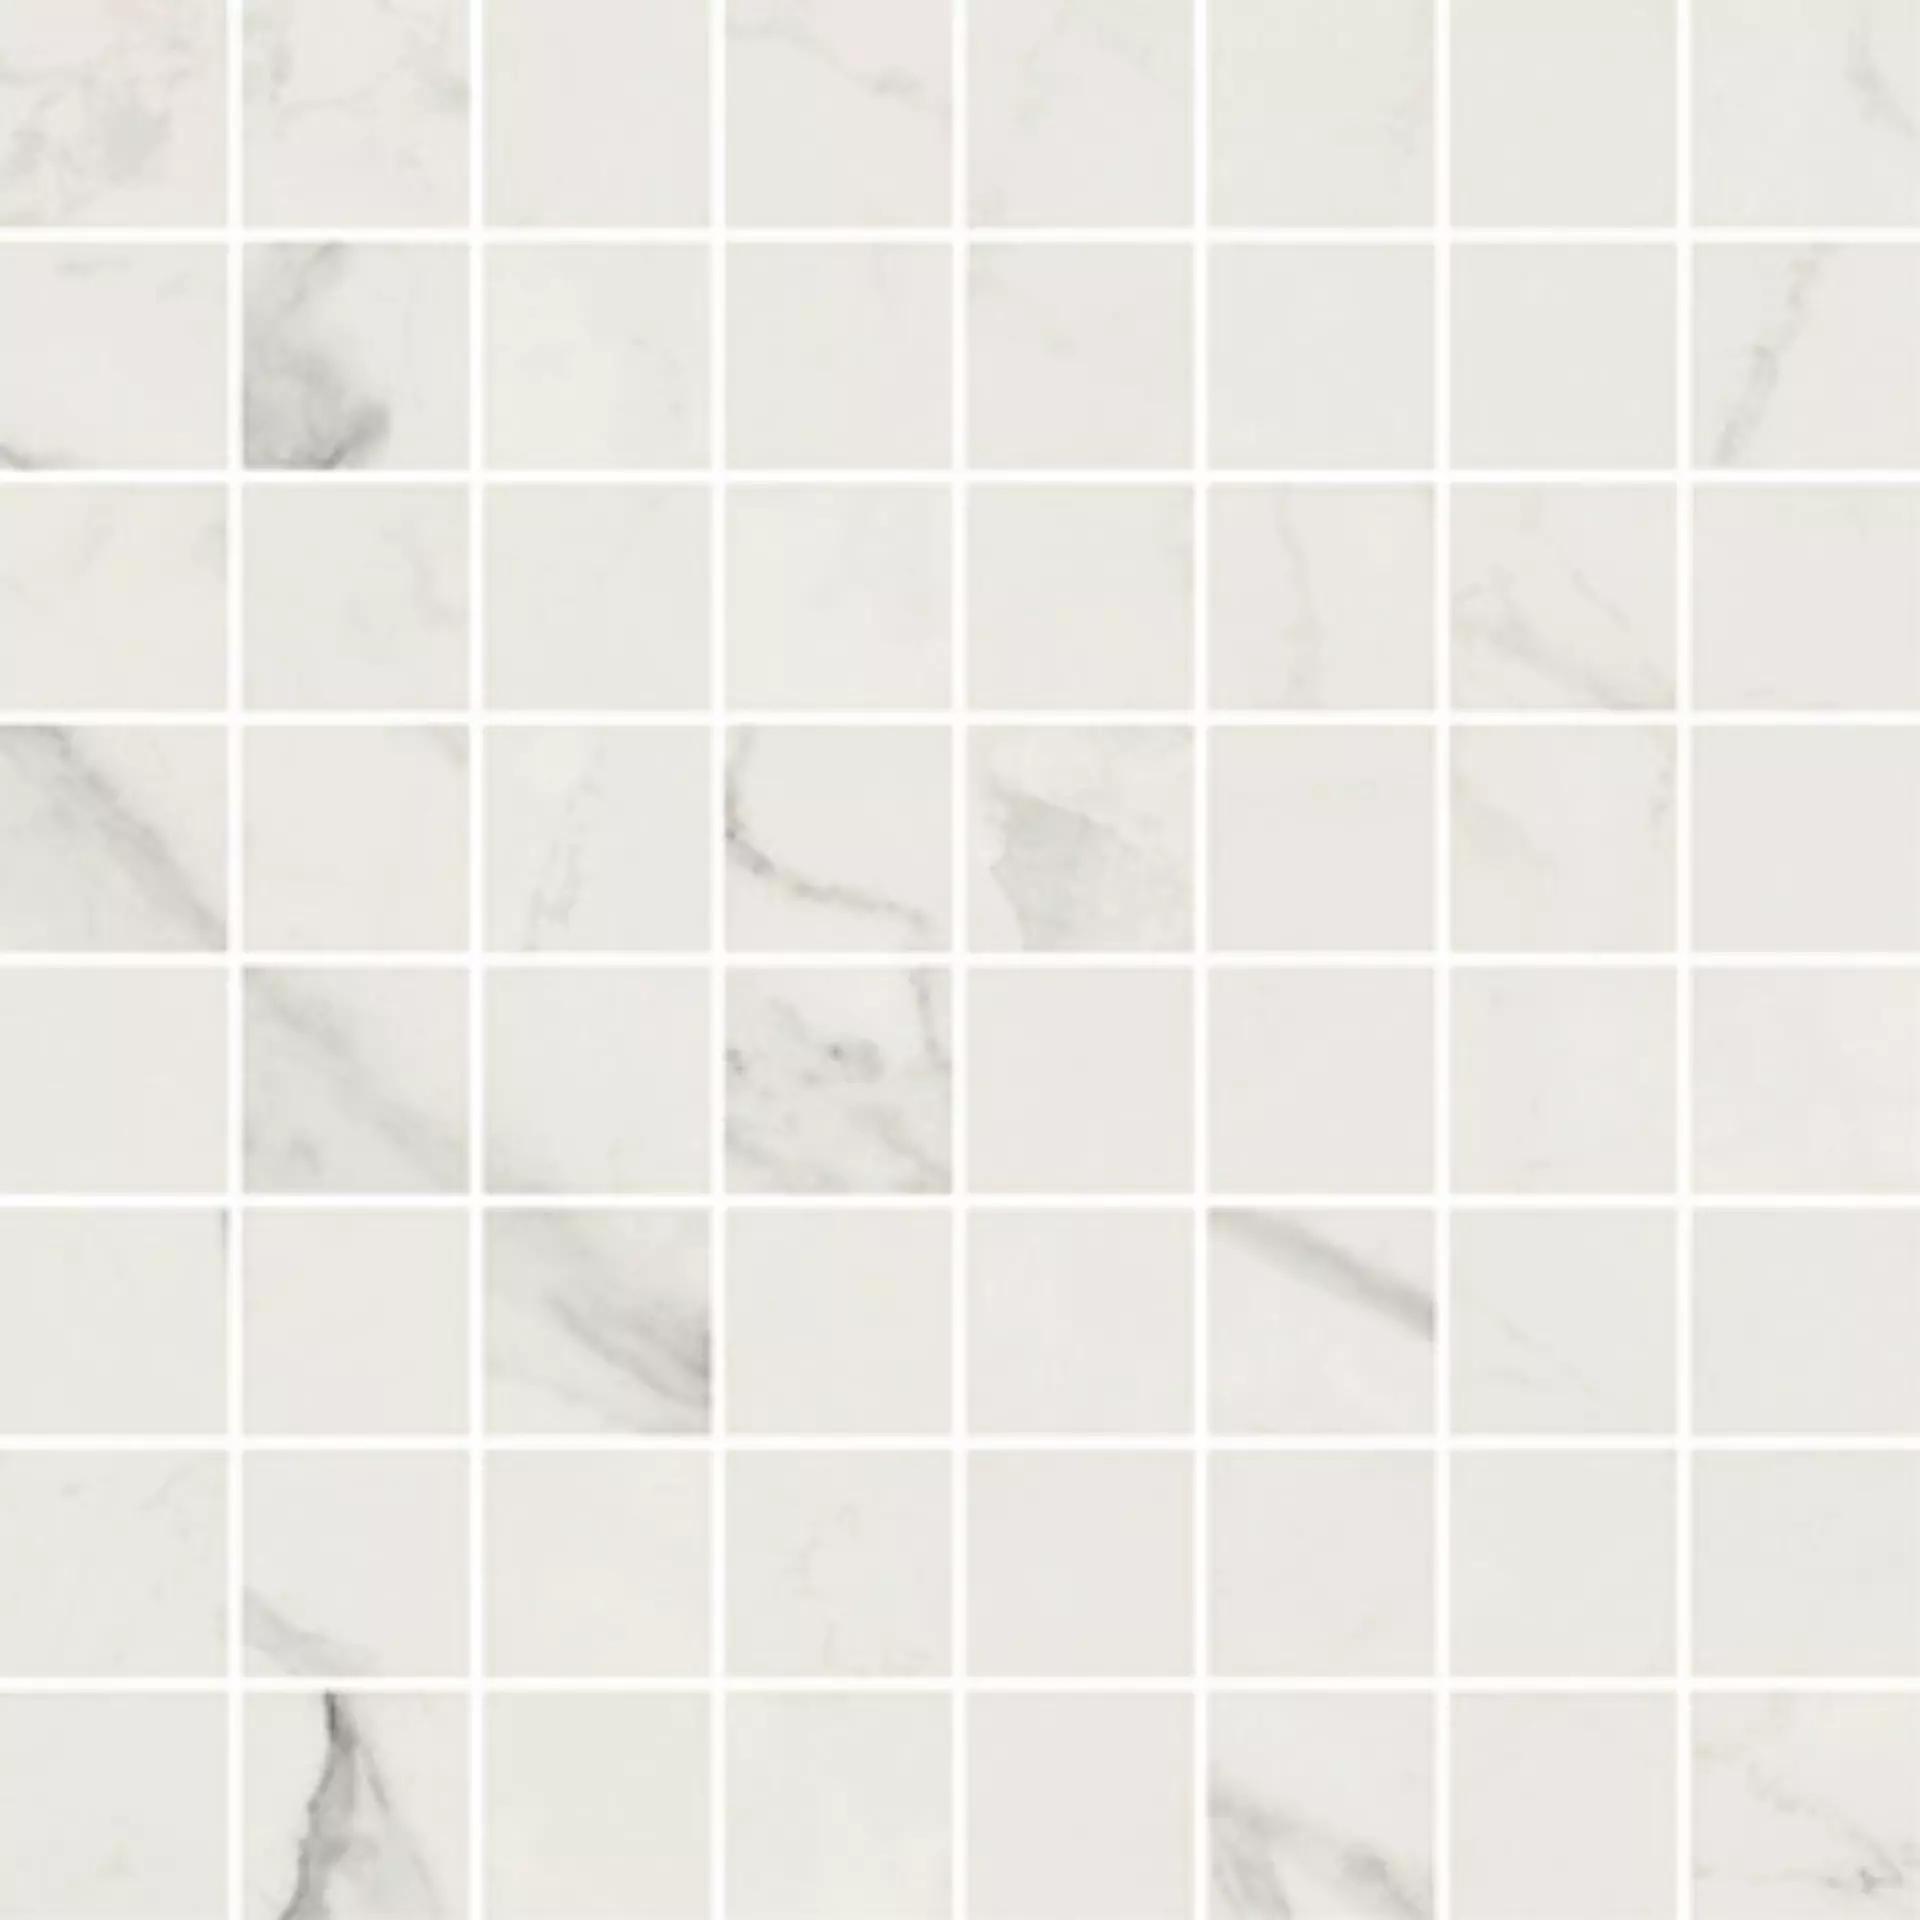 Villeroy & Boch Victorian White Polished Mosaic (3,7x3,7) 2005-MK1P 3,7x3,7cm rectified 9mm